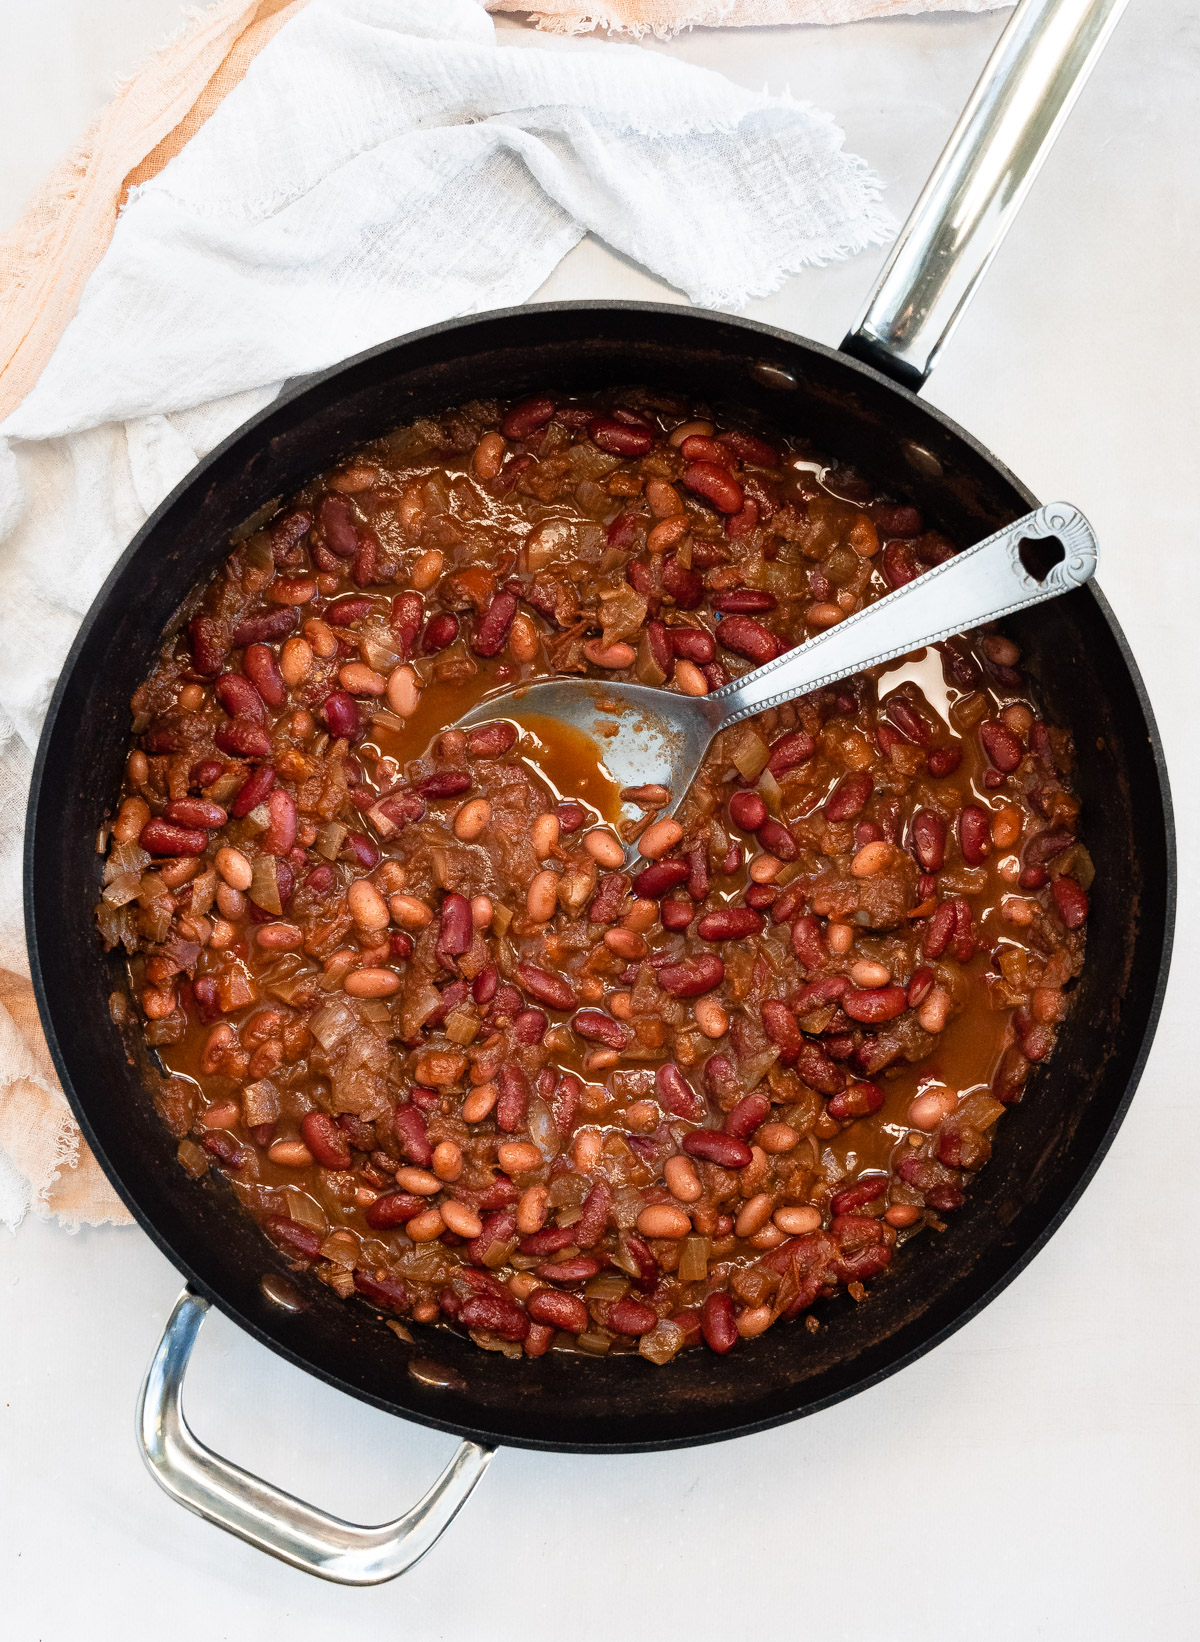 a black pot of red kidney beans in tomato sauce